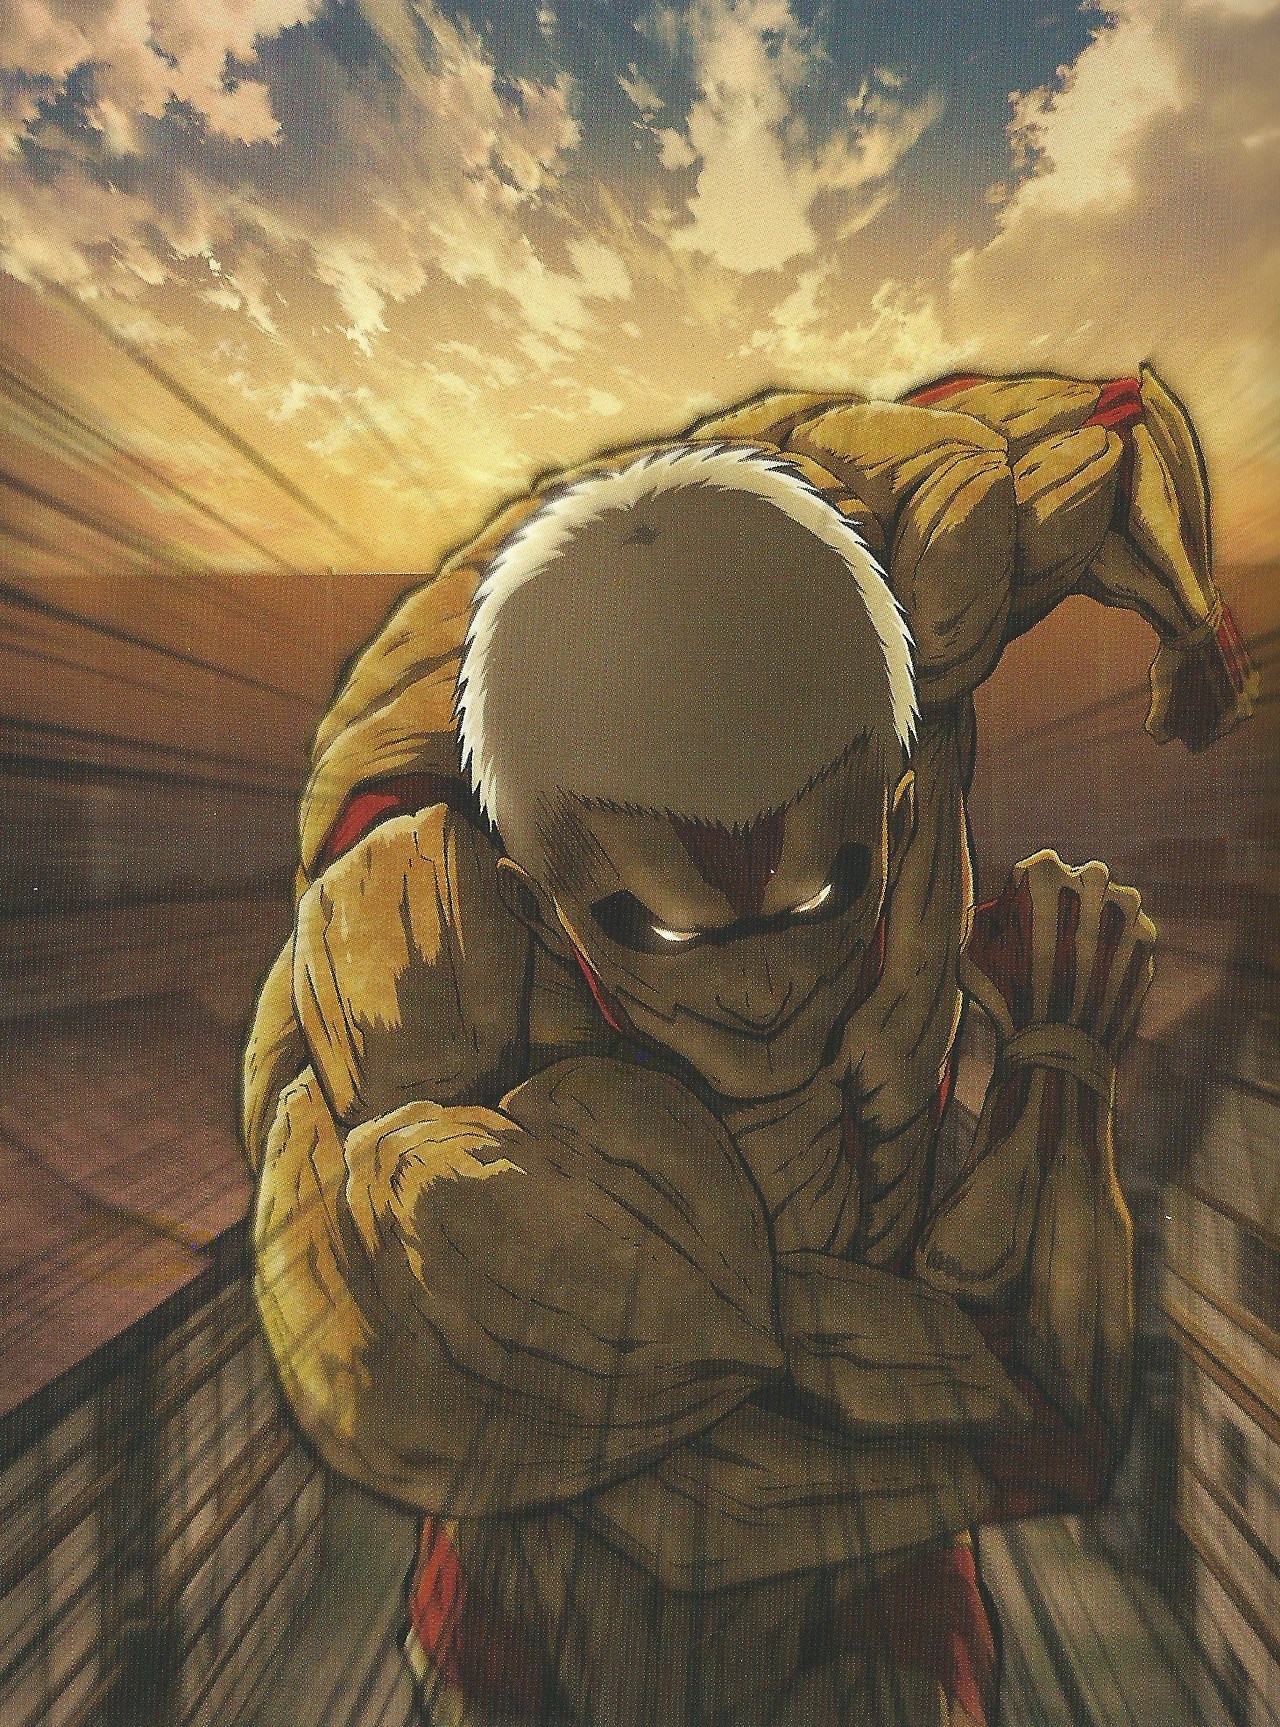 You're not a Slave. You're not a God.” — Artwork of the armored titan  charging...